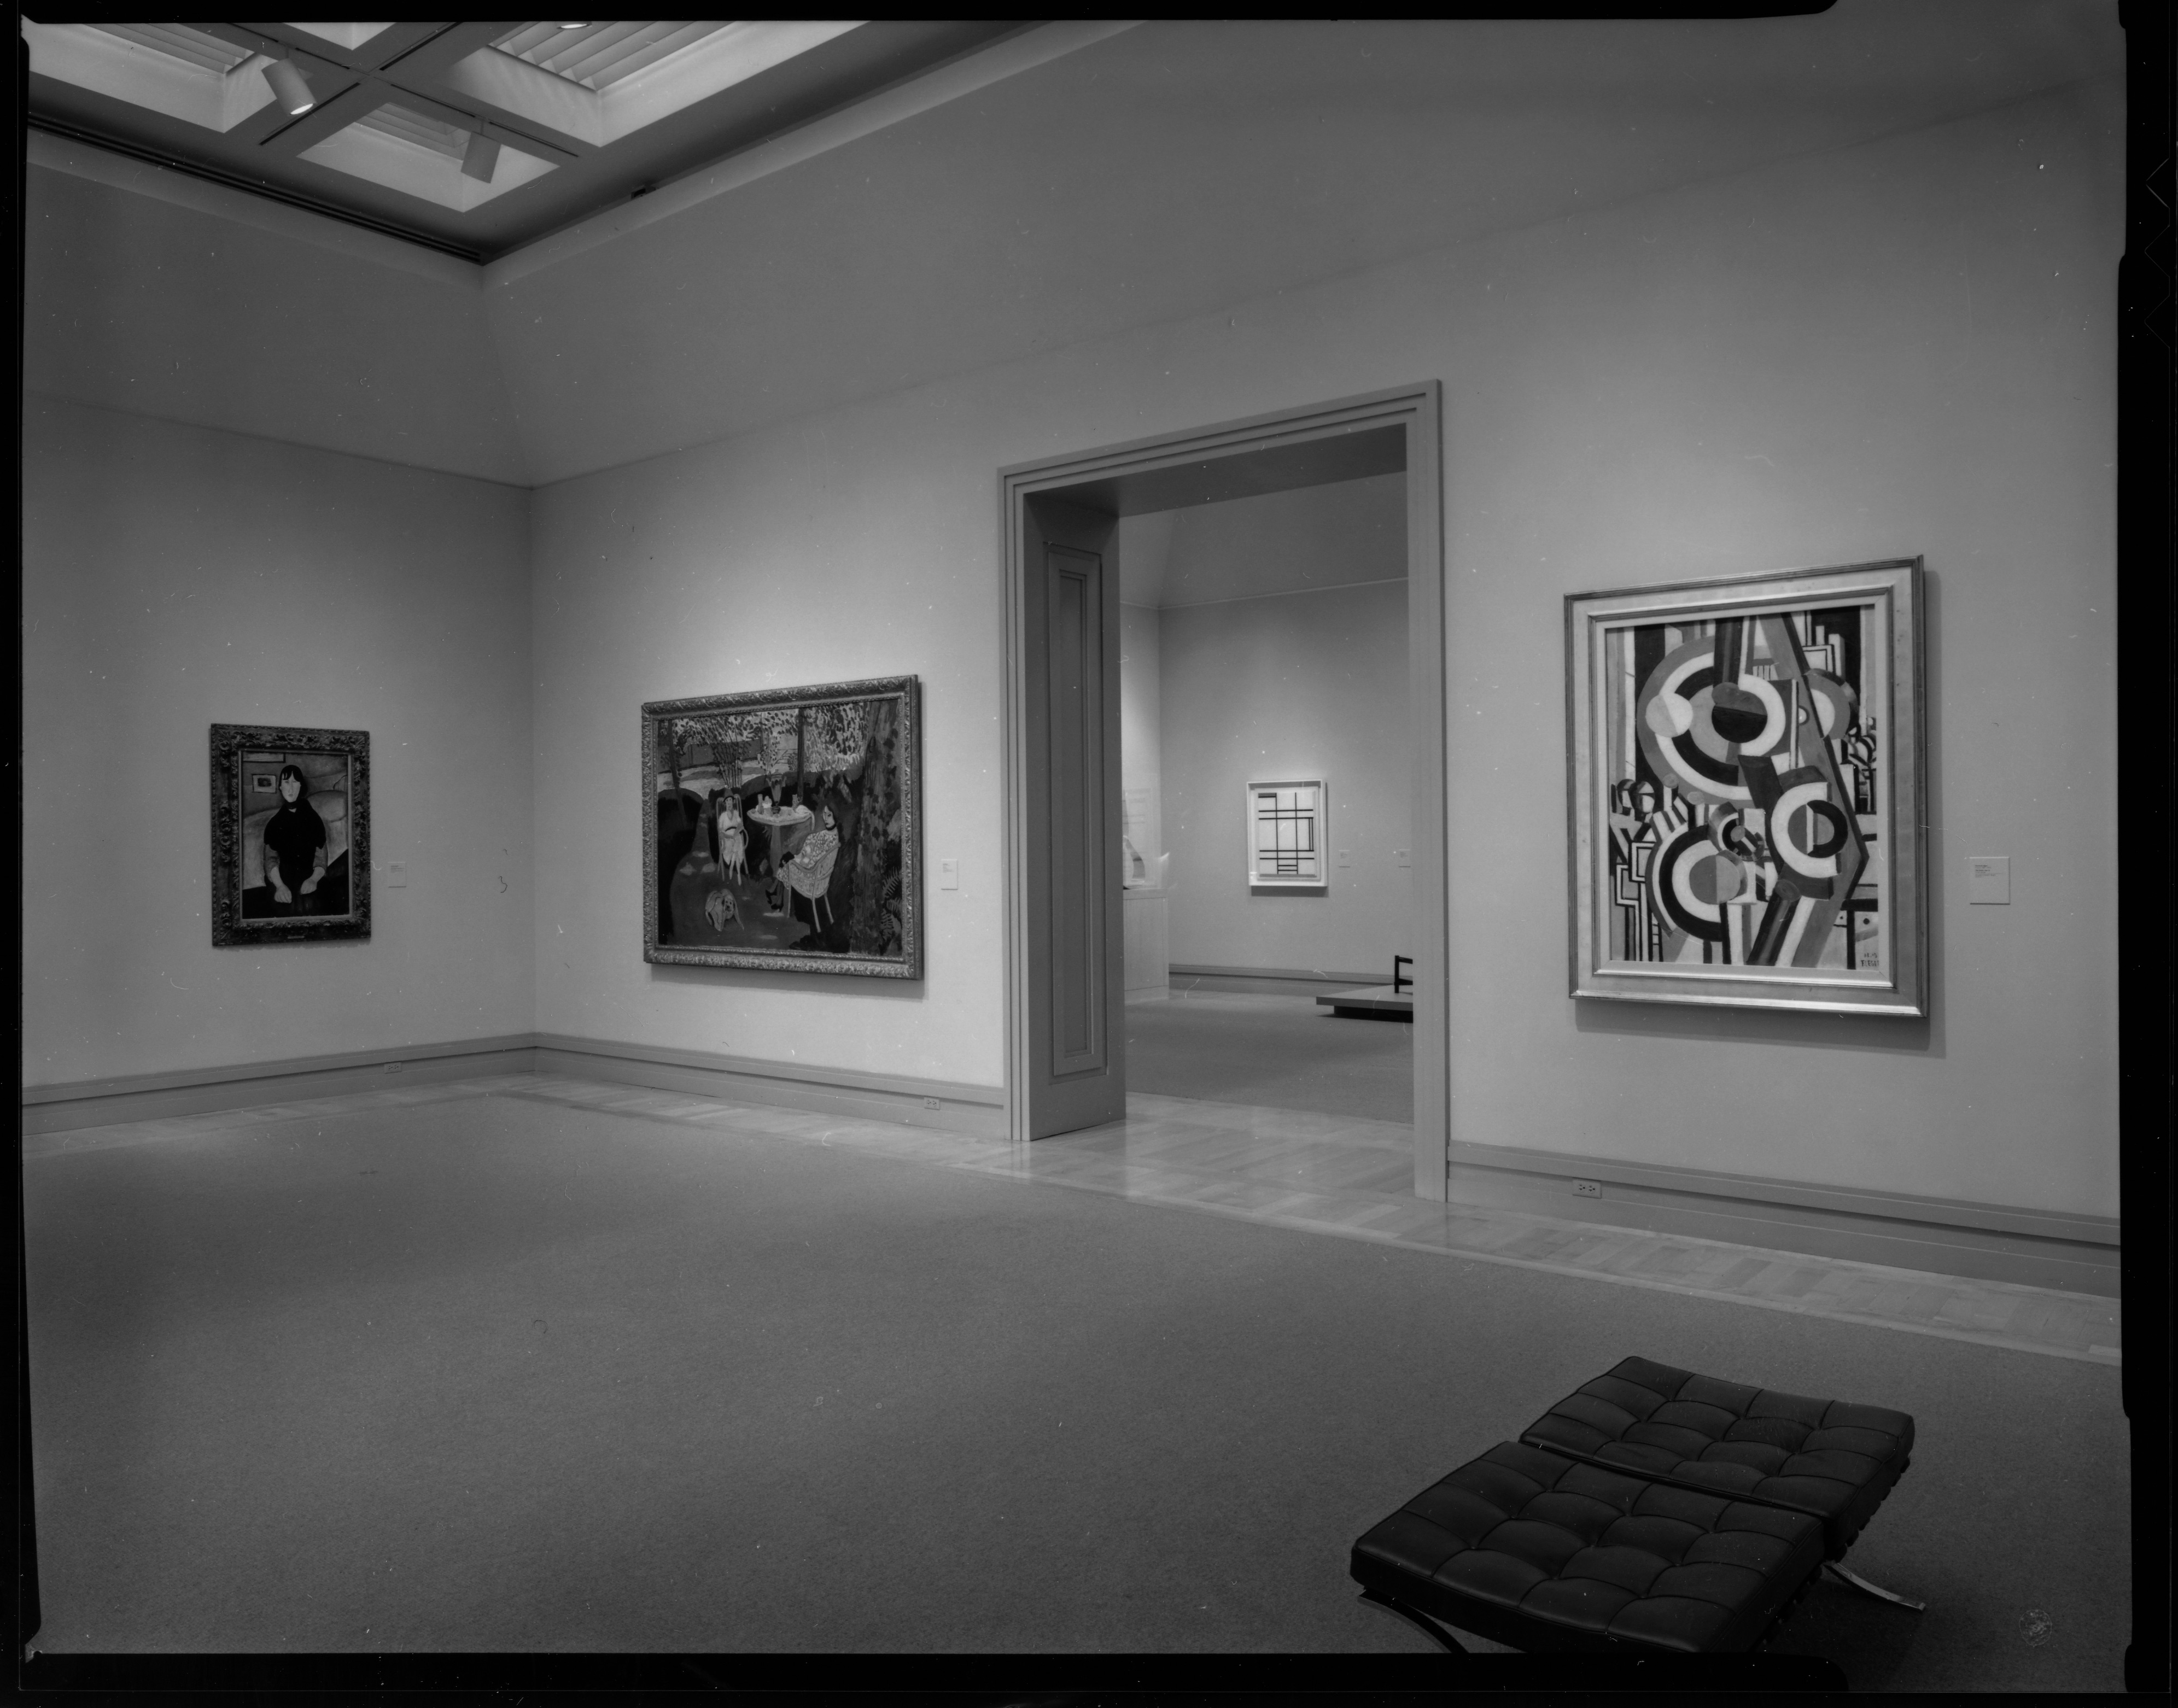 Black and white photograph with paintings on the walls